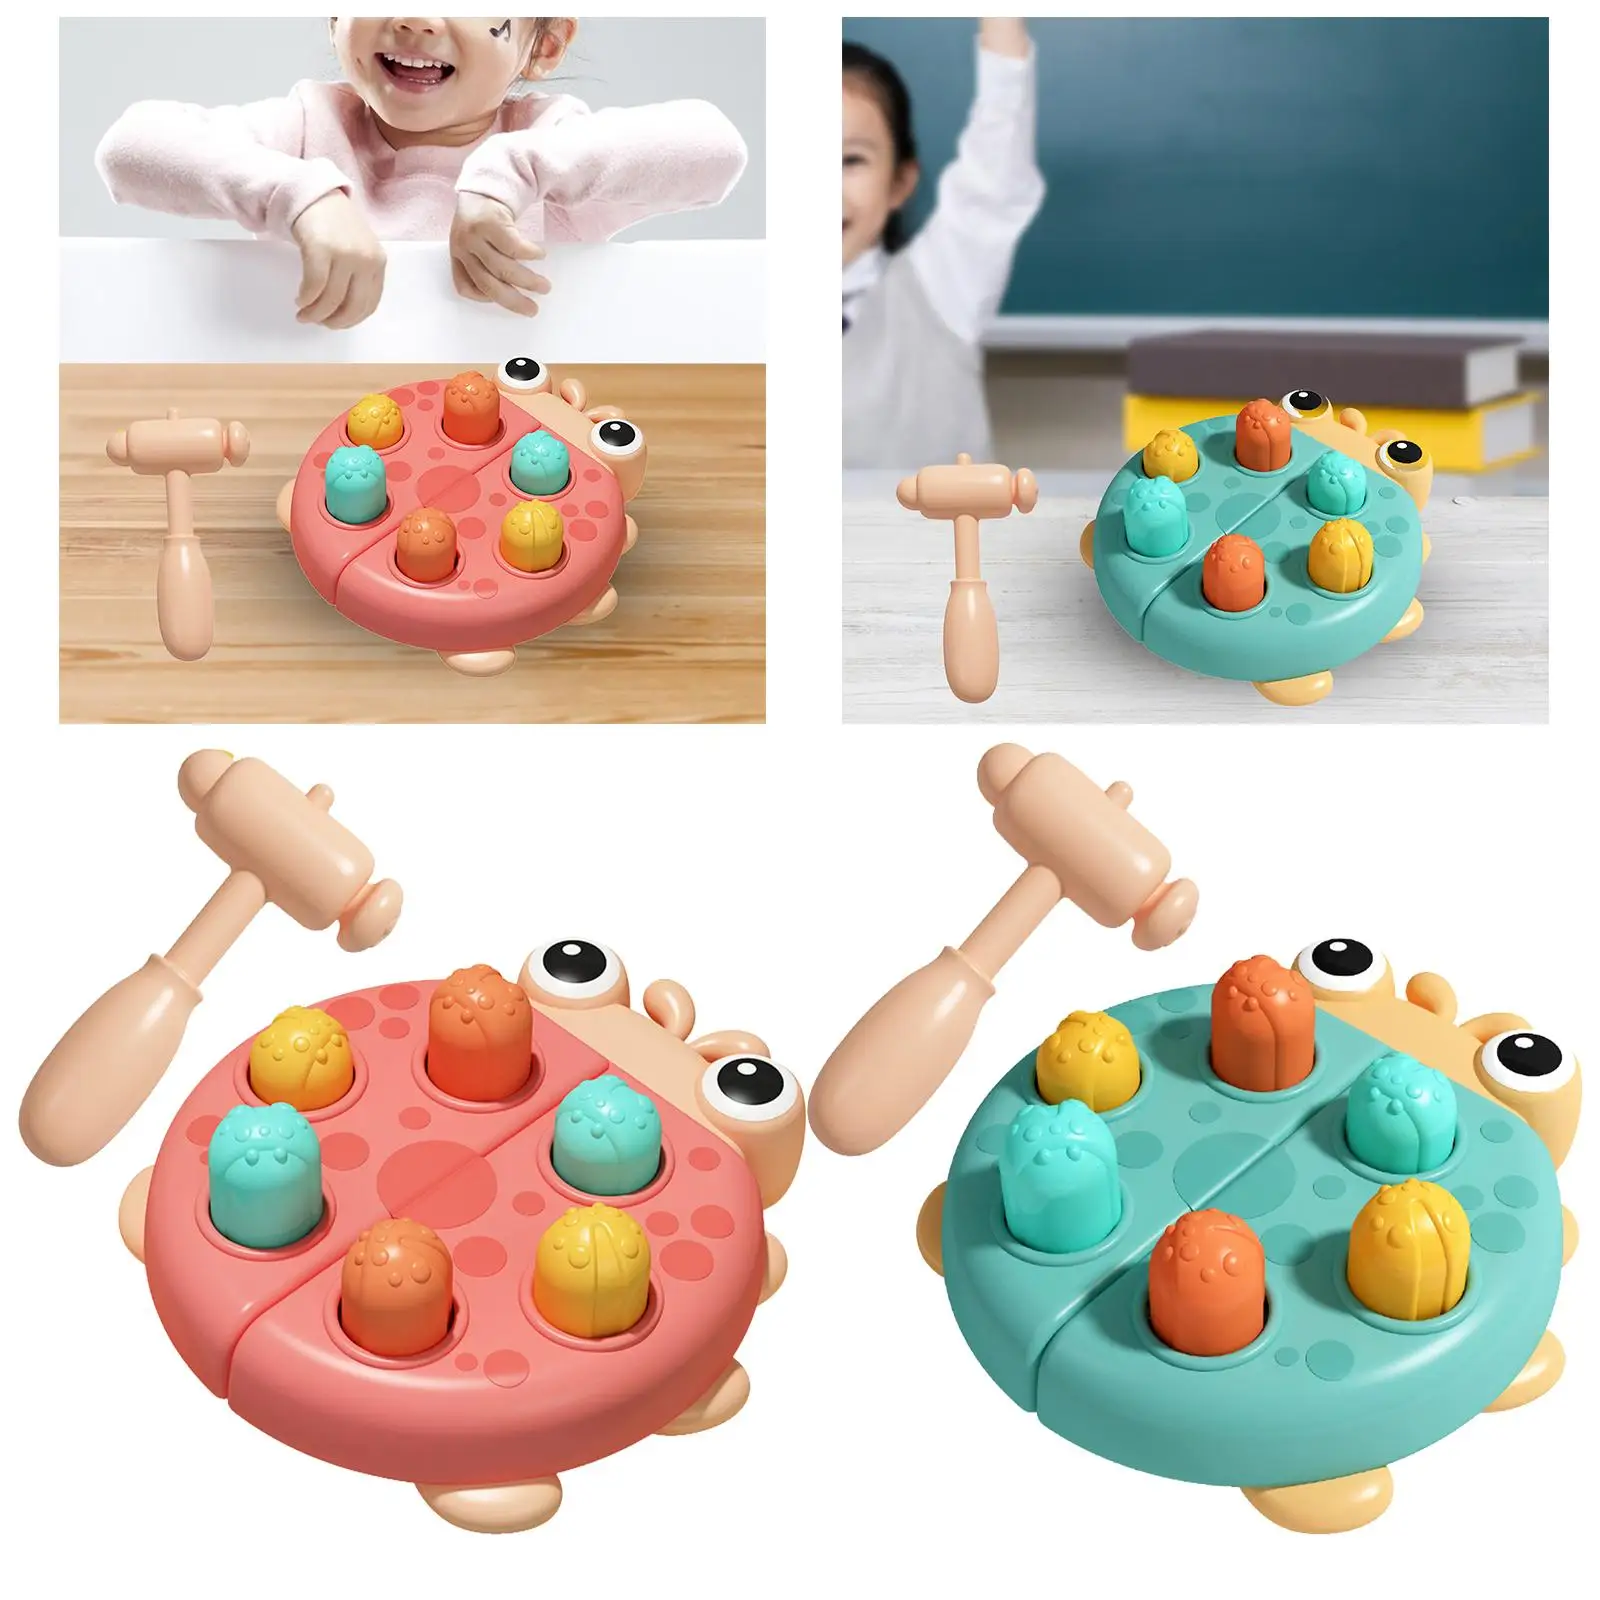 Fun Baby Whack Game Toy Developmental Toy Pounding Game Early Educational with Hammer for Kids Parties Boys Birthday Gifts